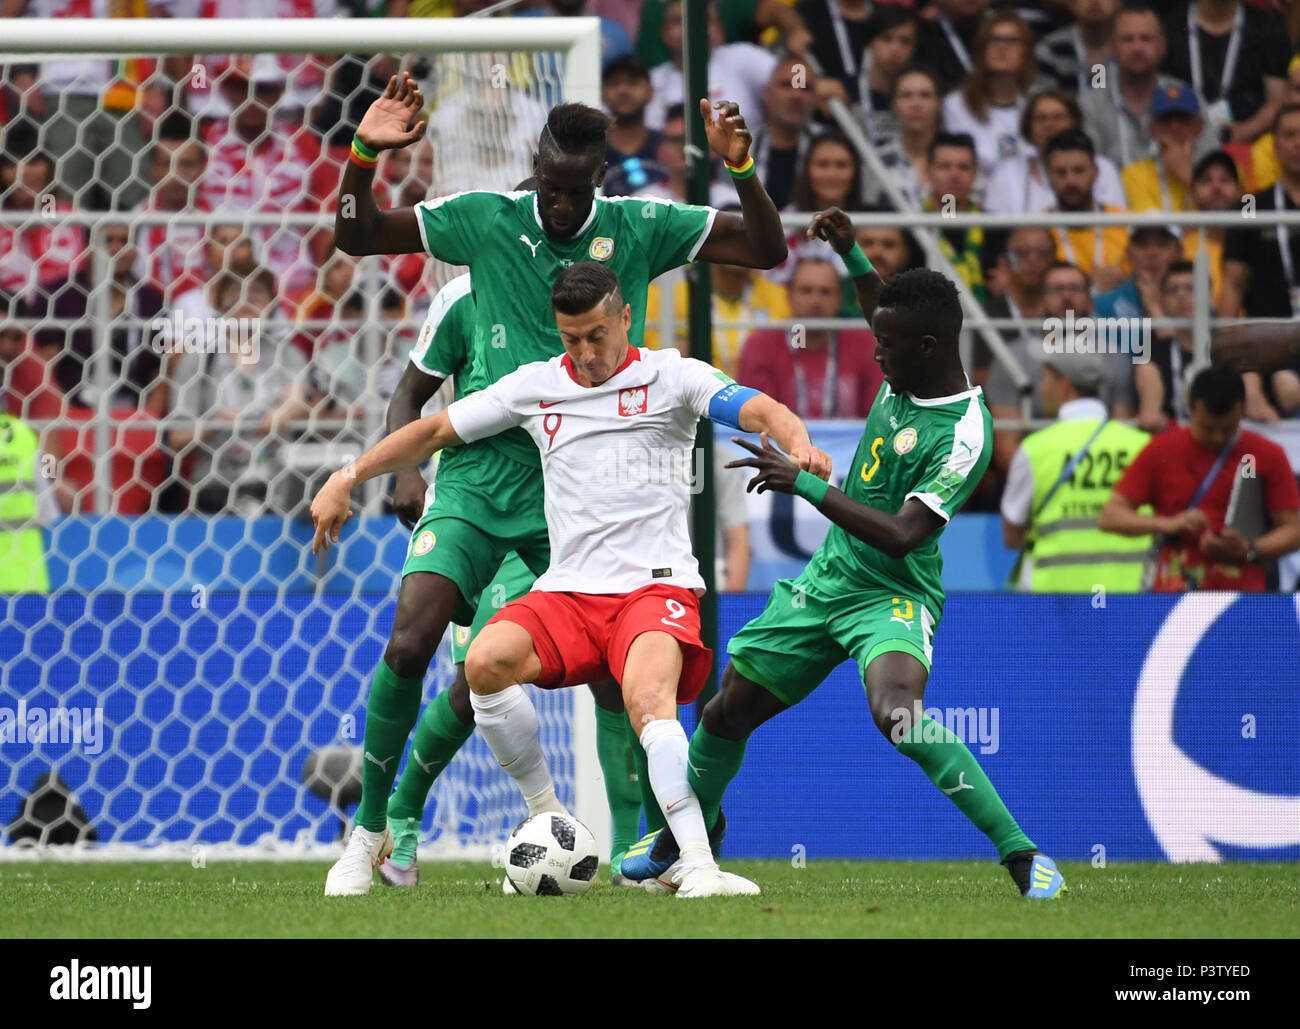 Moscow, Russia. 19th June, 2018. Soccer: World Cup 2018, group stages, group H: Poland vs Senegal at Spartak Stadium. Poland's Robert Lewandowski (C) and Senegal's Salif Sane (L) and Idrissa Gueye vie for the ball. Credit: Federico Gambarini/dpa/Alamy Live News Stock Photo